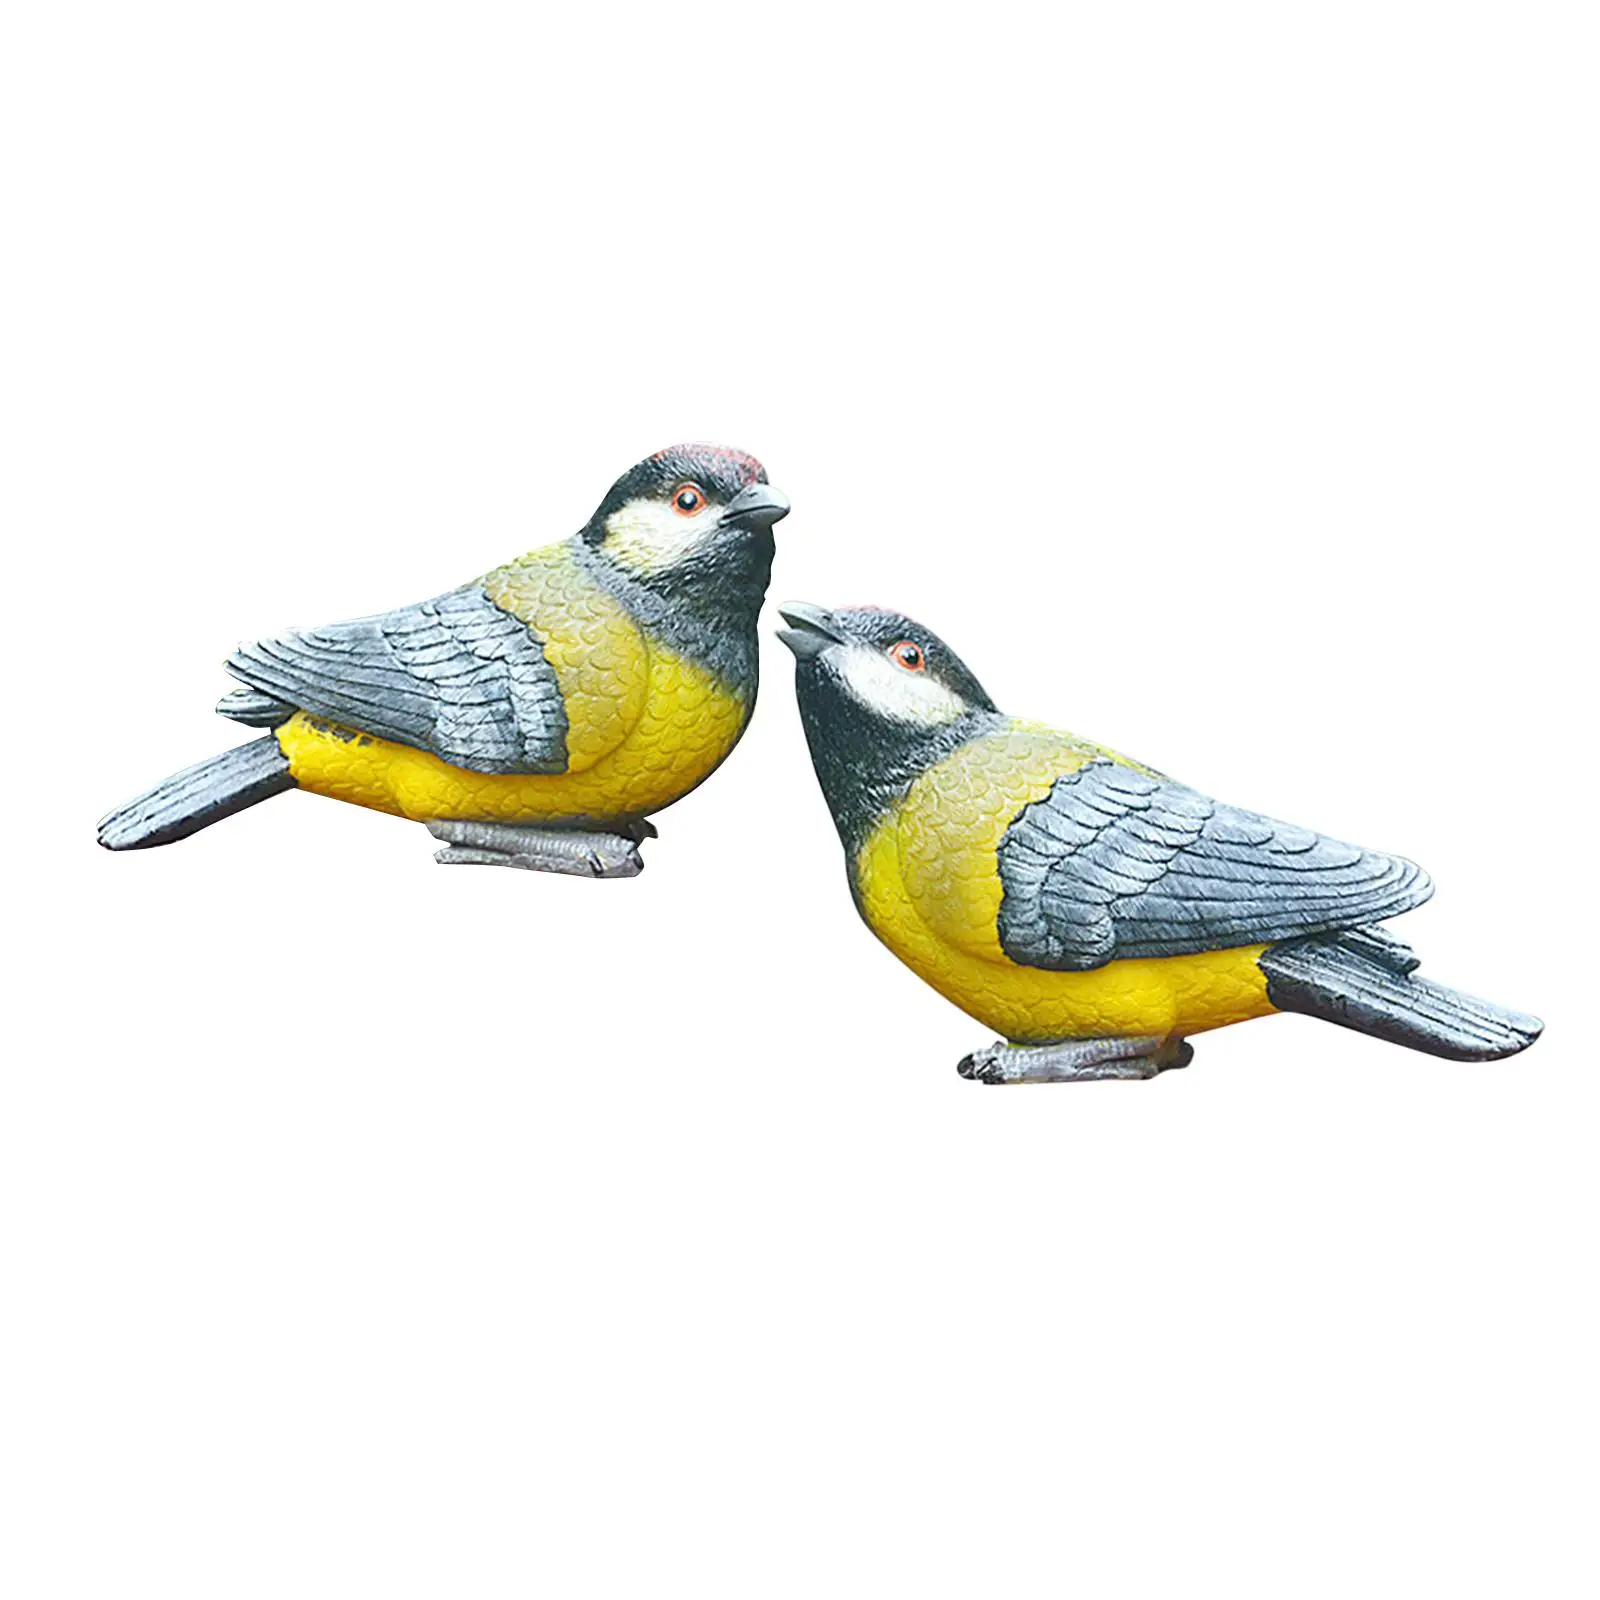 2Pcs Bird Statues Decorative Simulation Art Crafts Ornament Sculpture Figurines for Bookcase Outdoor Indoor Yard Office Lawn